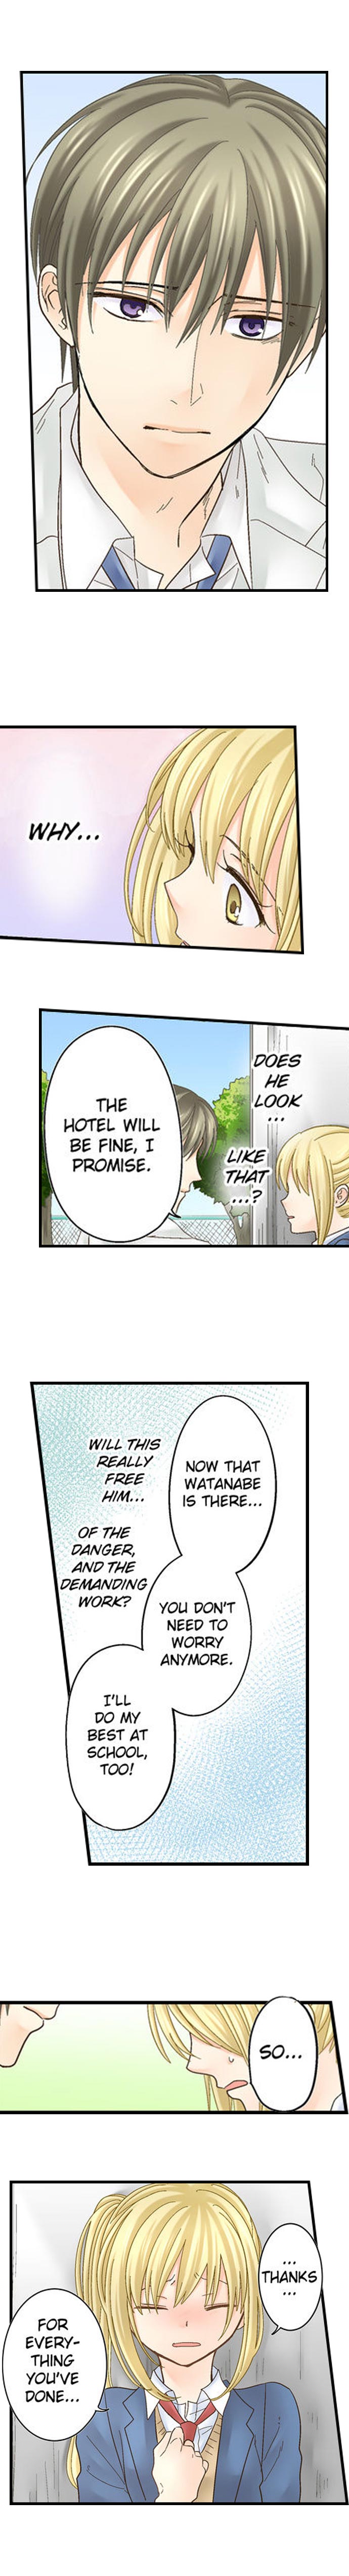 Running a Love Hotel with My Math Teacher - Chapter 27 Page 8